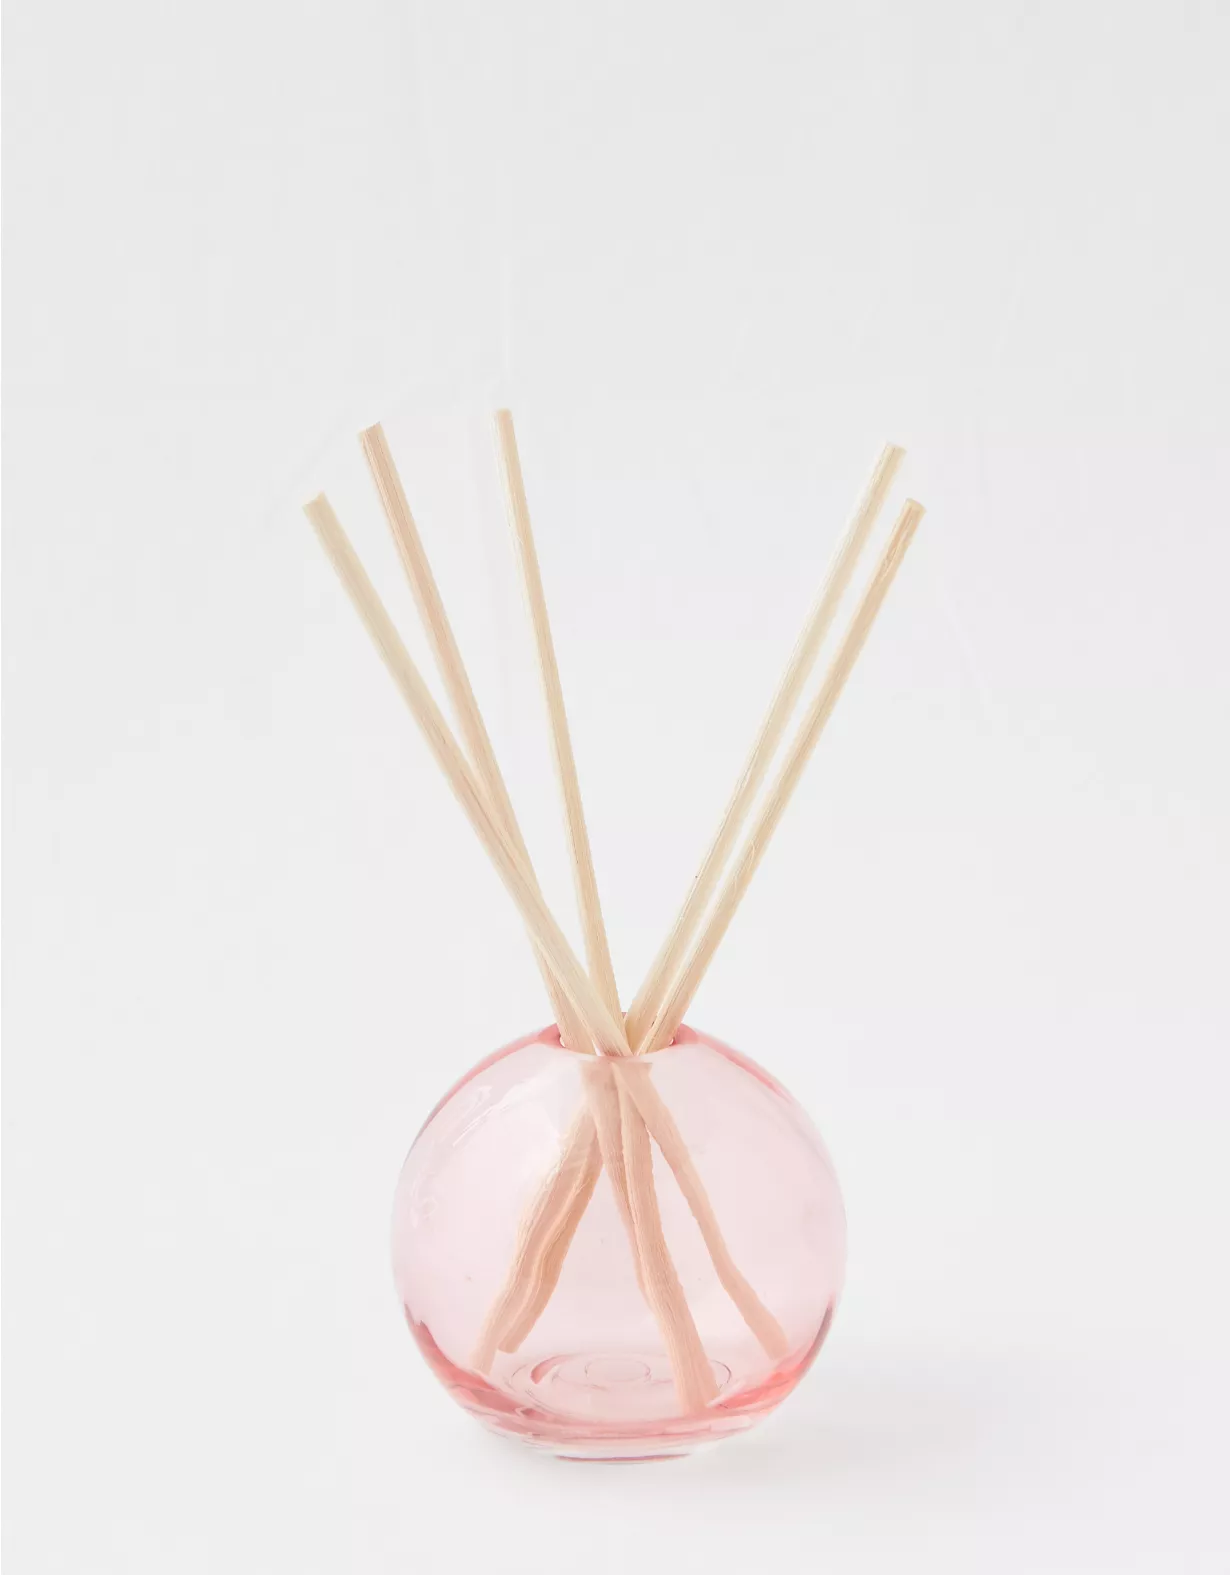 Paddywax Reed Diffuser